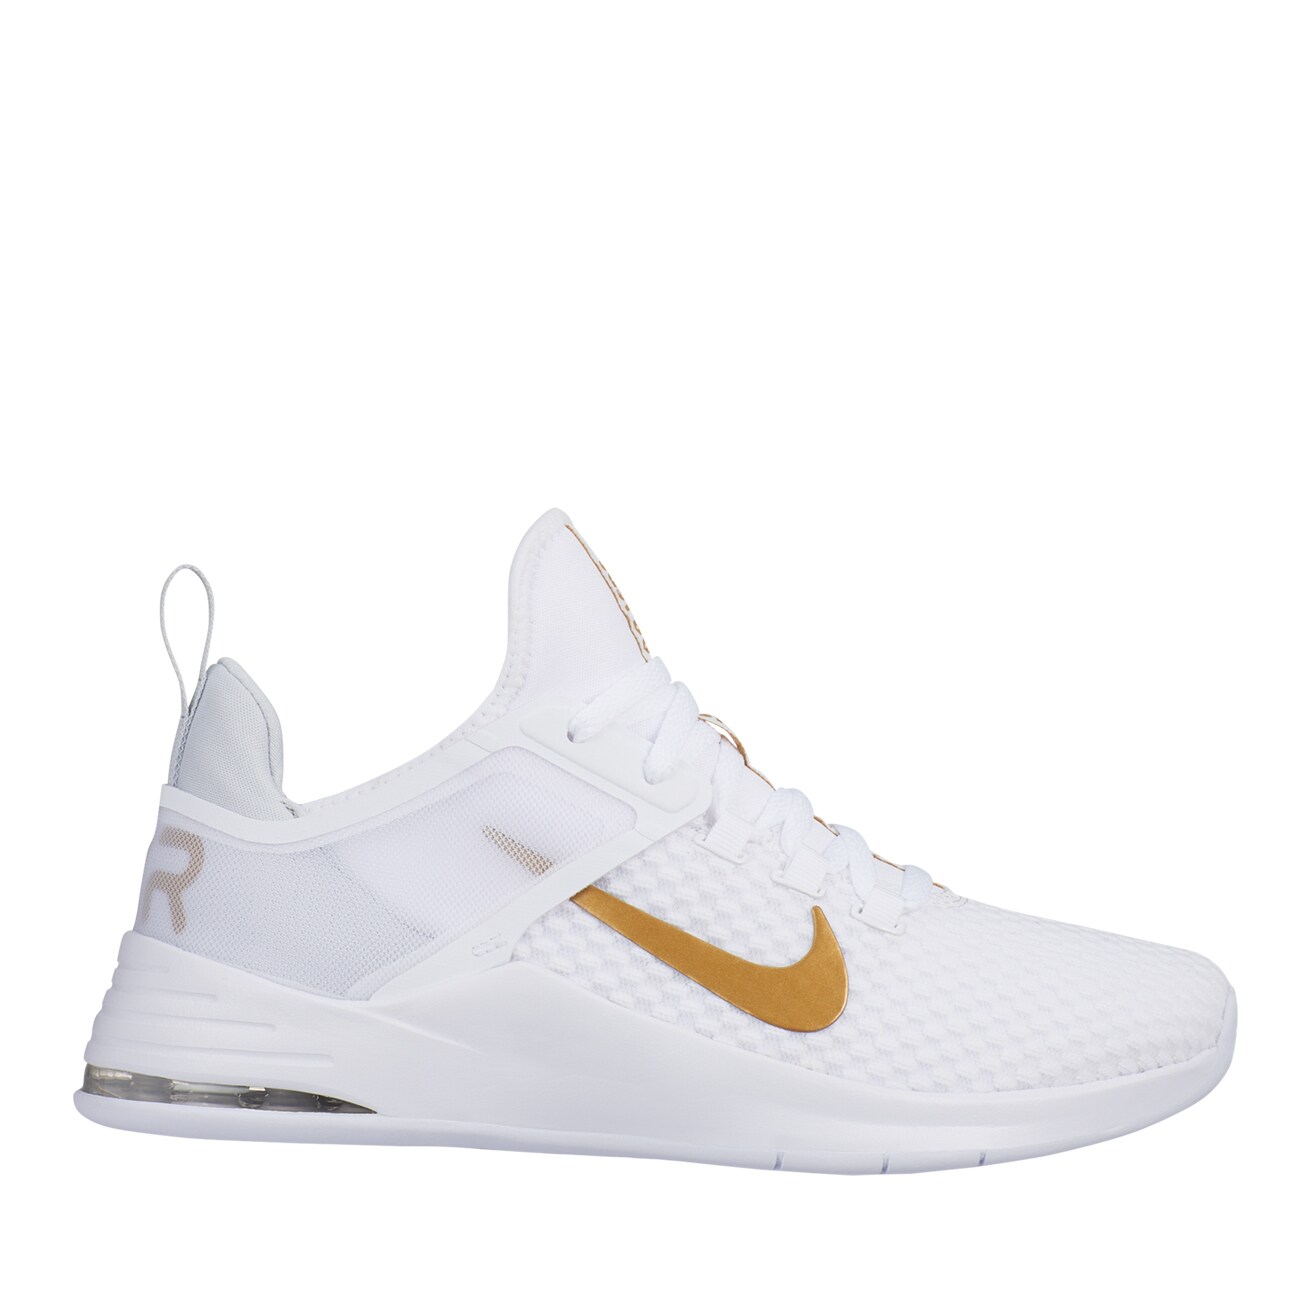 air max bella 2 trainer white and gold